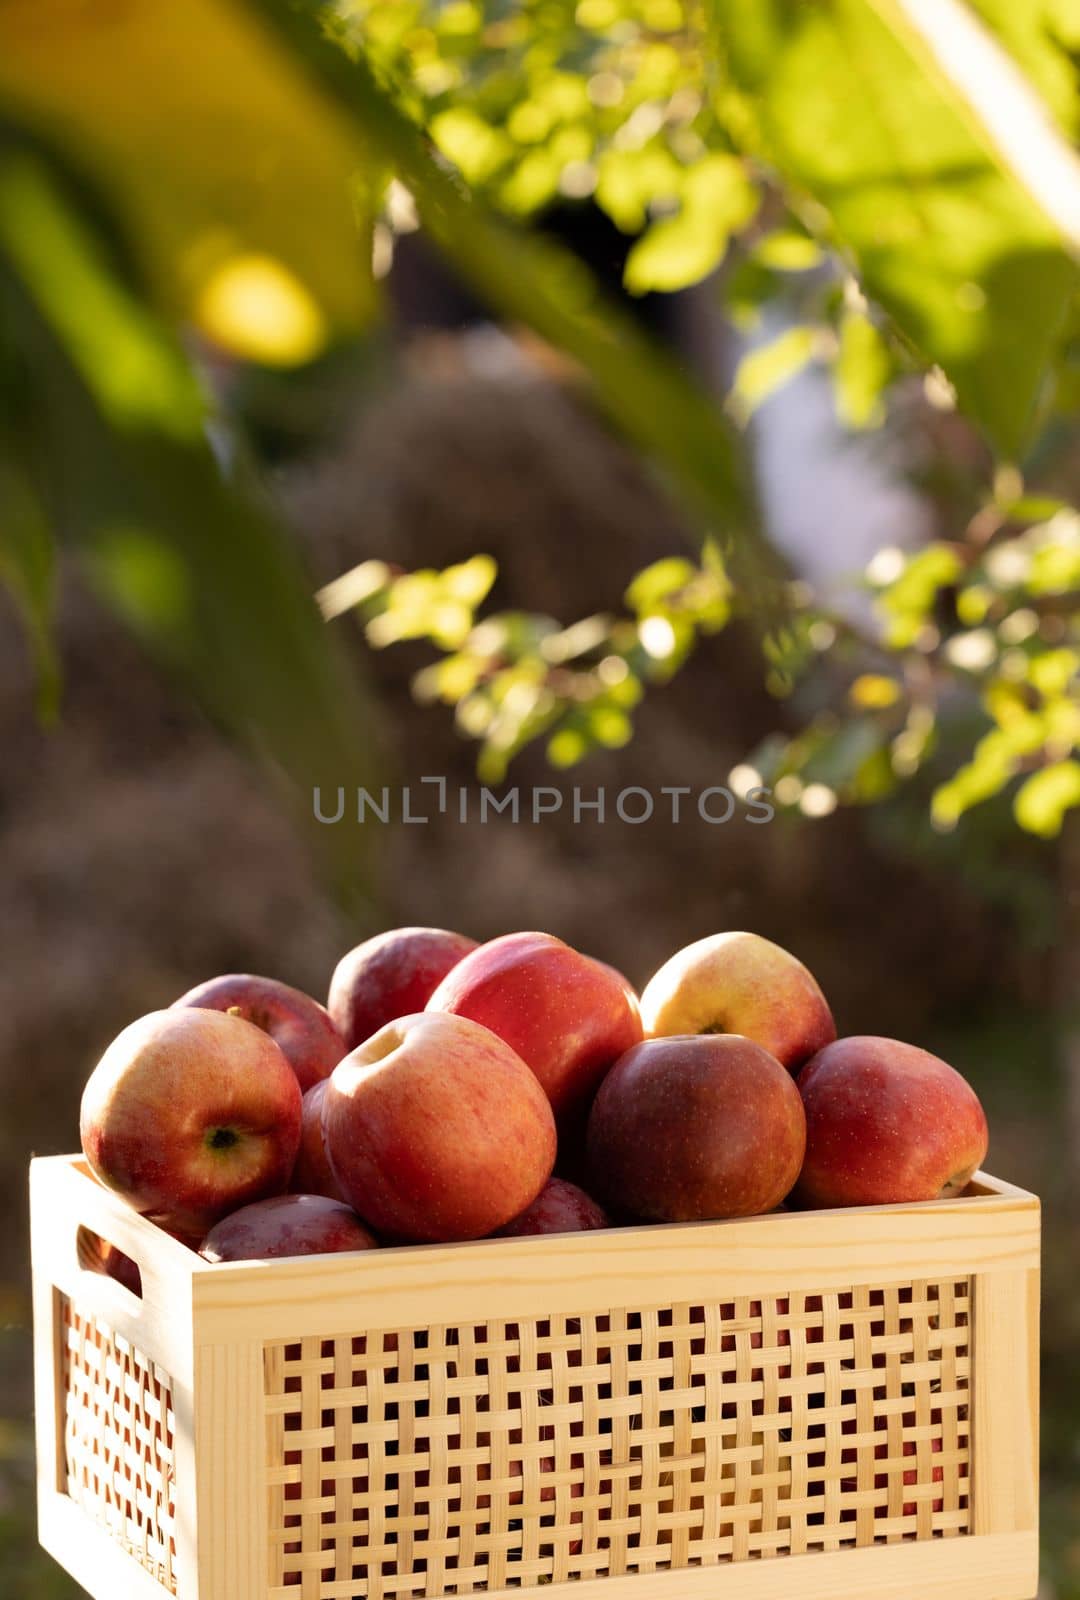 Apple harvesting. Organic fruit. Apple farming. Wooden box with red, ripe, freshly picked, juicy, selective apples. Picking apple harvest. Gardening Organic Food